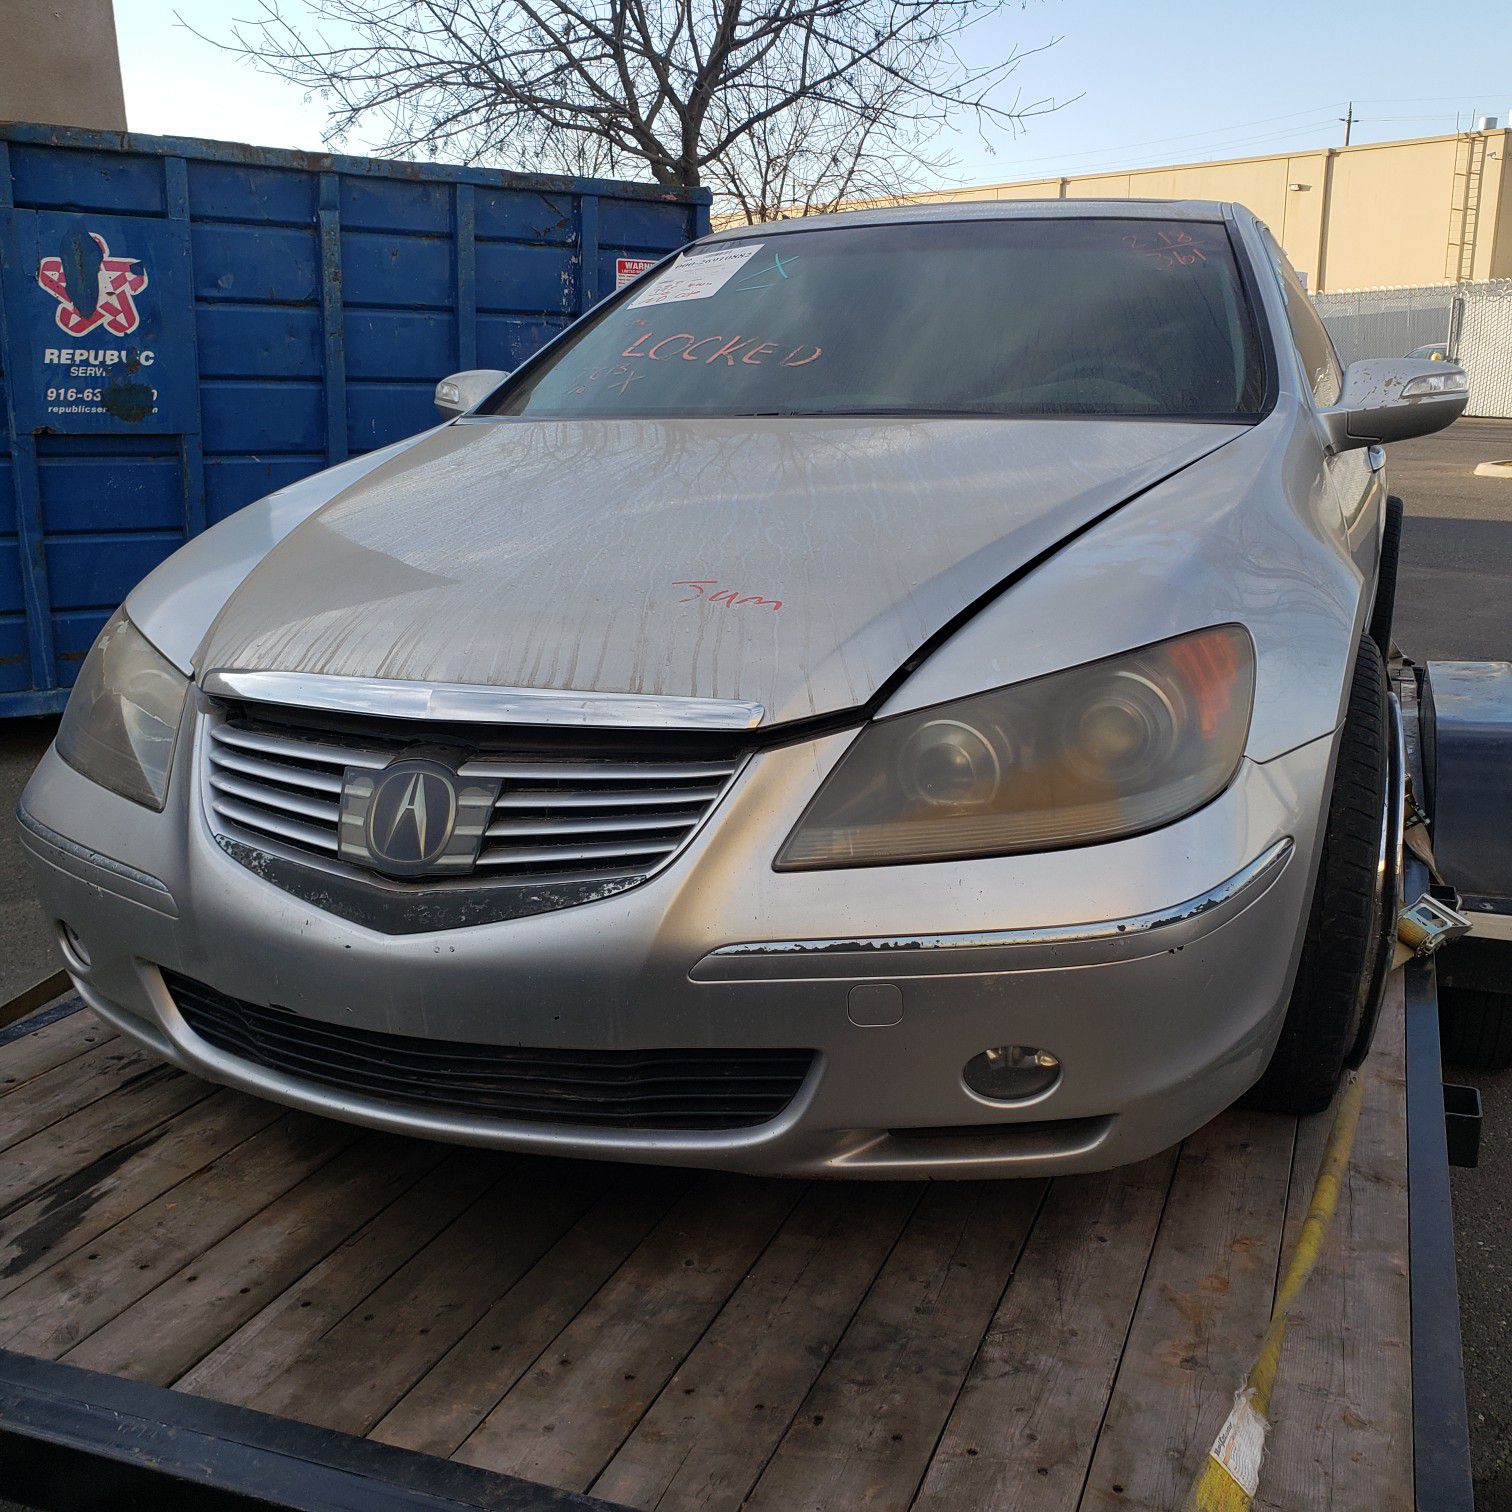 05 06 06 08 2005 2006 2007 2008 ACURA RL PARTS PART CAR PARTING OUT